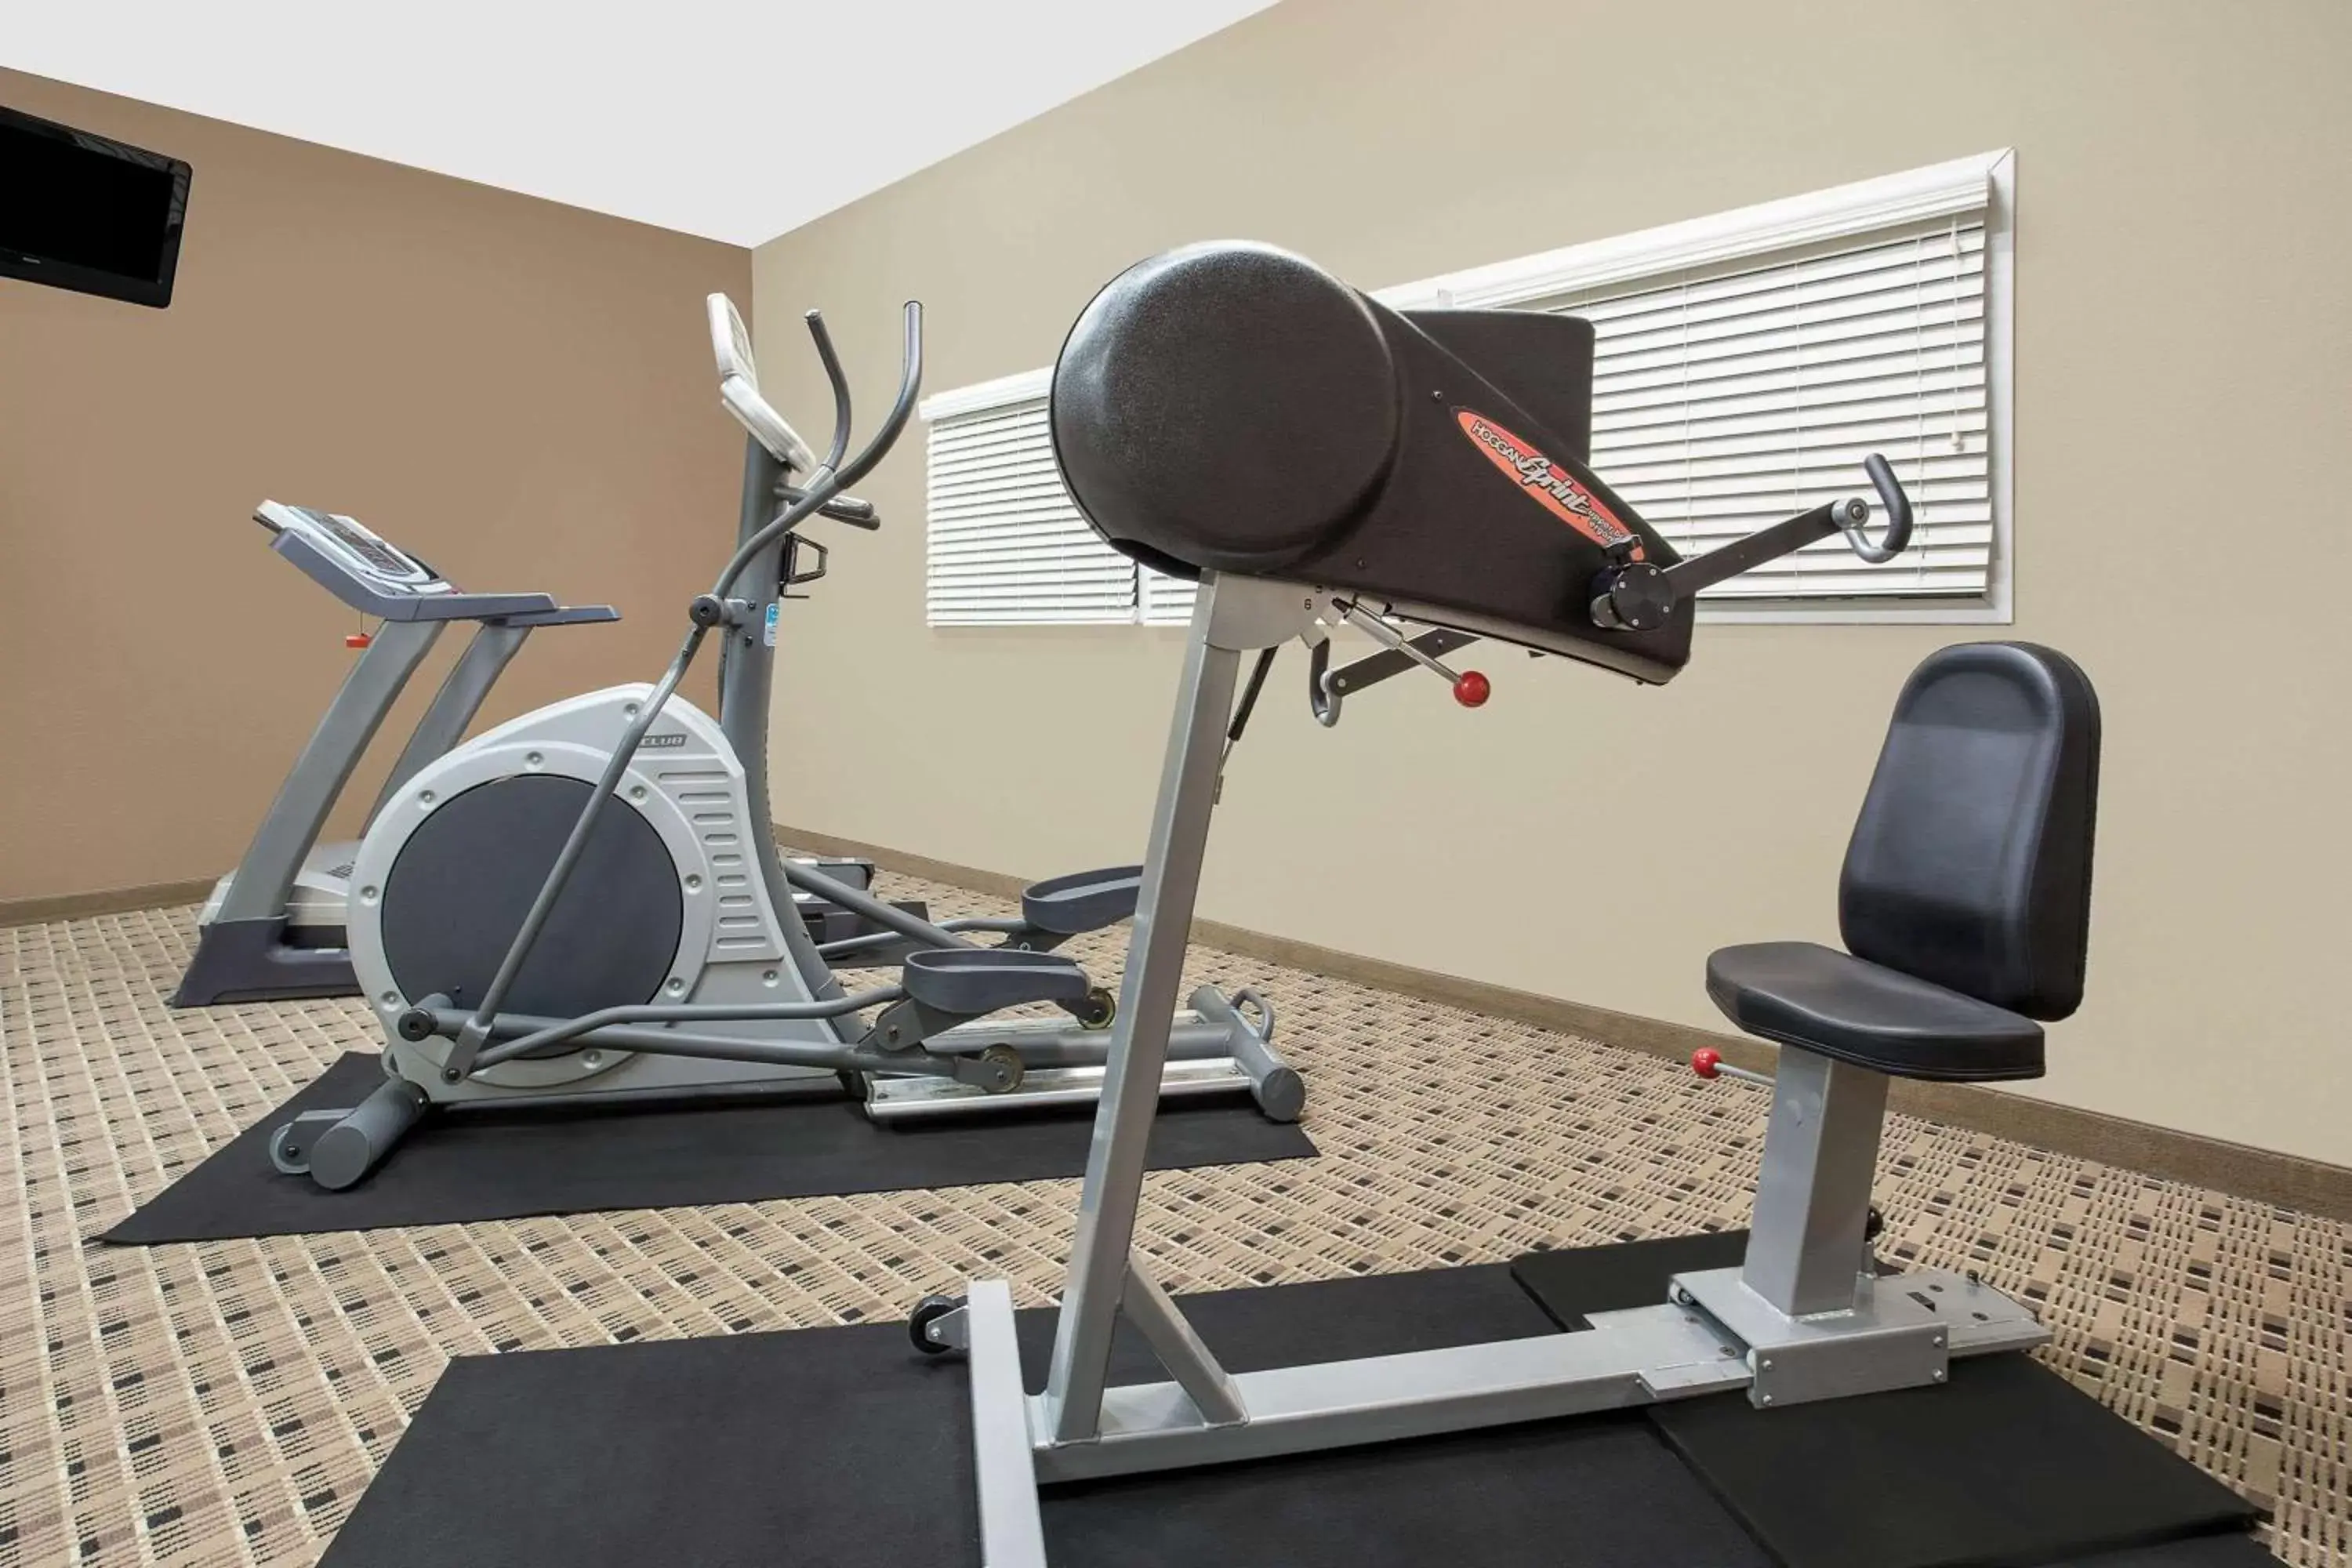 Fitness centre/facilities, Fitness Center/Facilities in Microtel Inn & Suites Mansfield PA